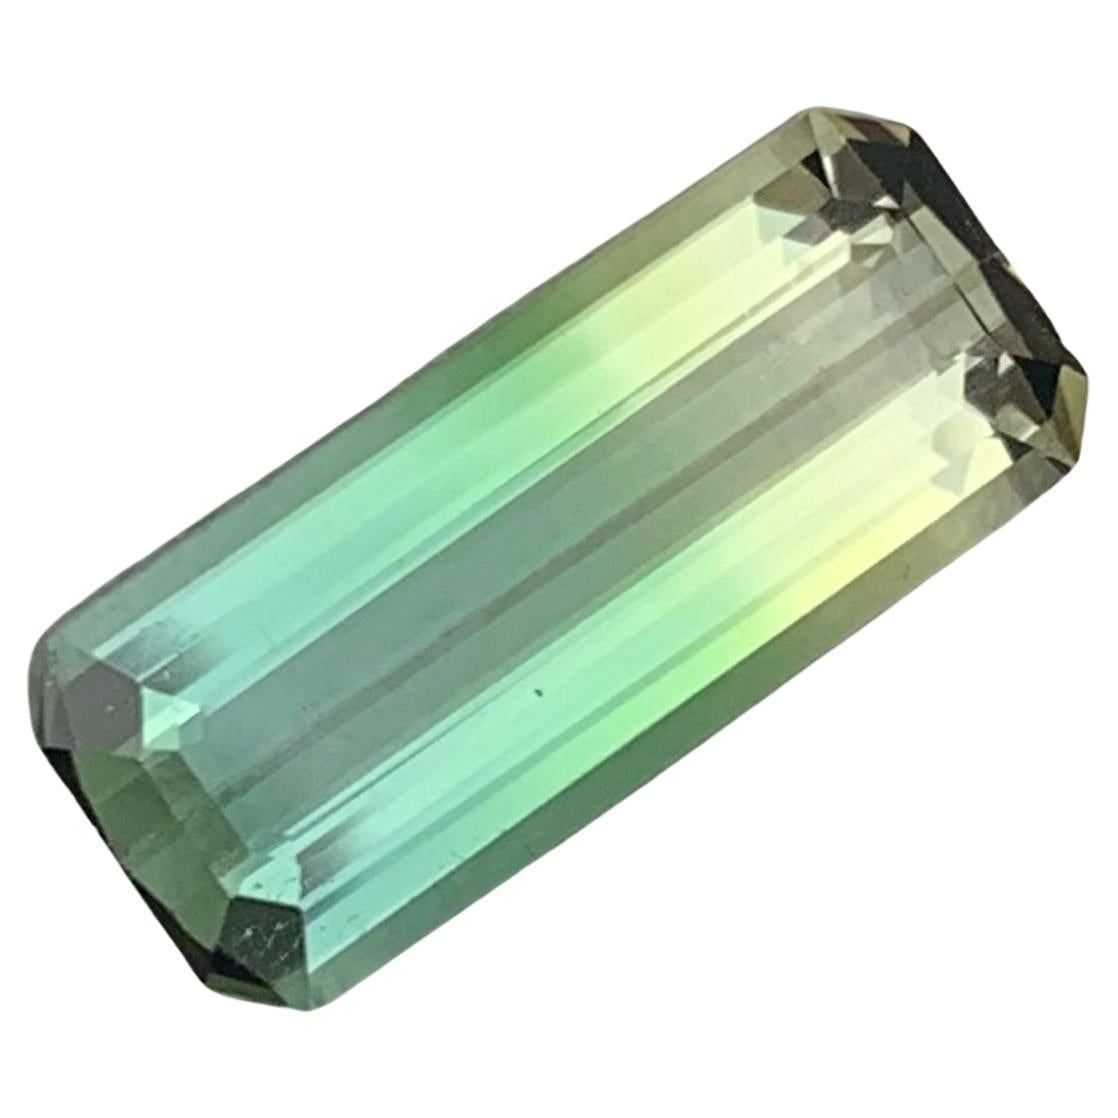 2.70 Cts Long Emerald Cut Faceted Bicolor Tourmaline Green Yellow Gemstone  For Sale